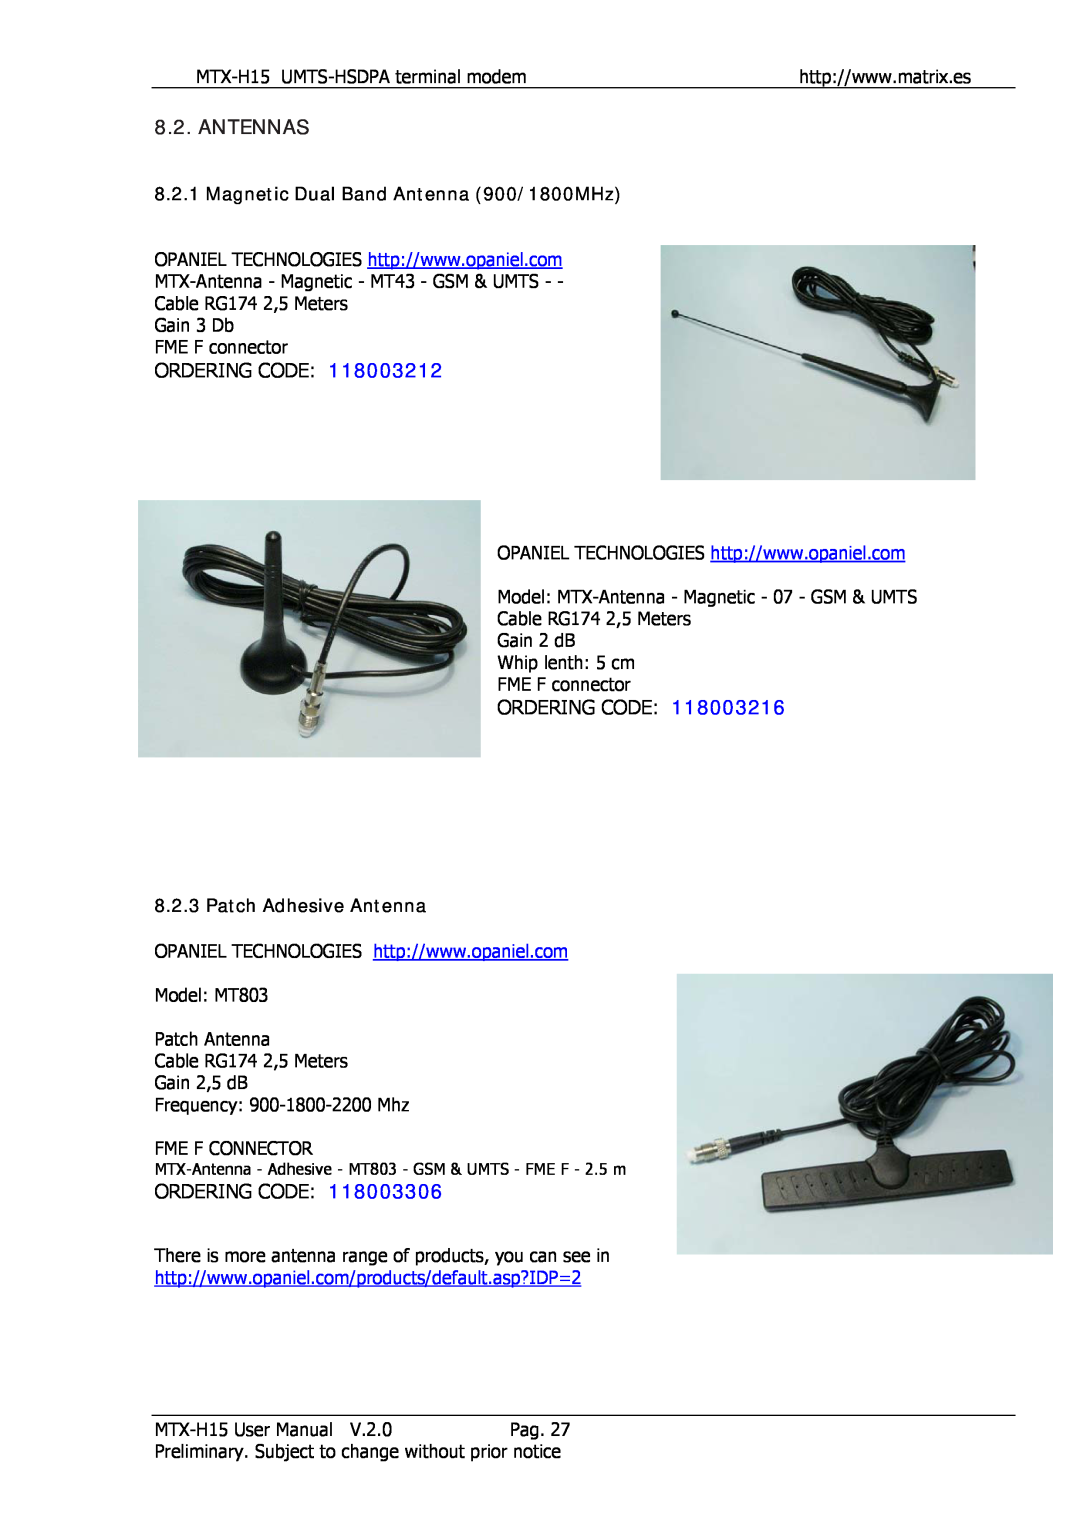 Siemens MTX-H15 user manual Antennas, Ordering Code, Magnetic Dual Band Antenna 900/1800MHz, Patch Adhesive Antenna 